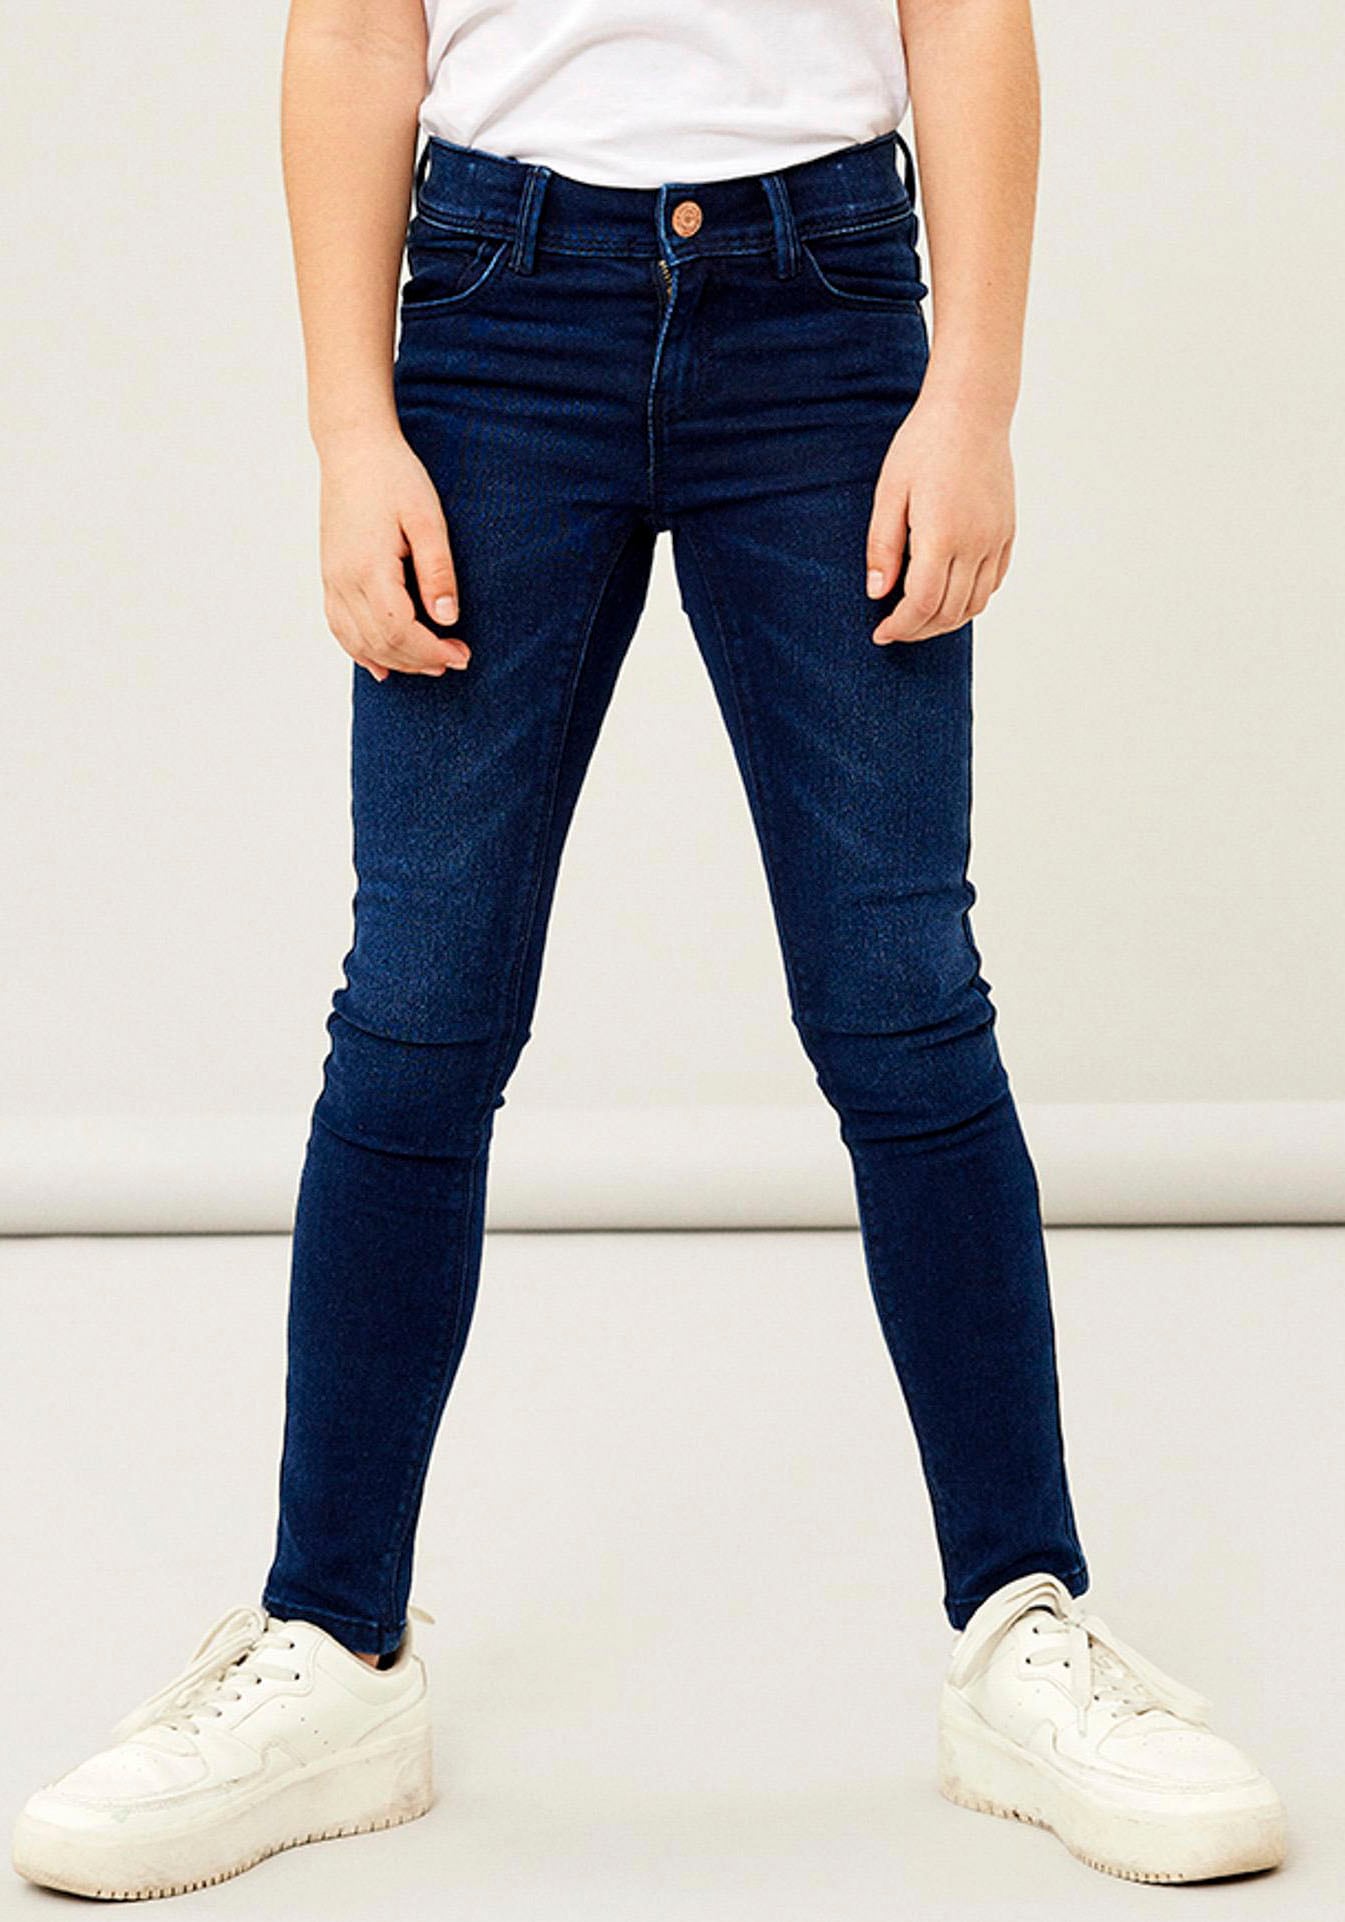 Stretch-Jeans DNMTAX Name bequemem bei PANT«, »NKFPOLLY Stretchdenim It aus